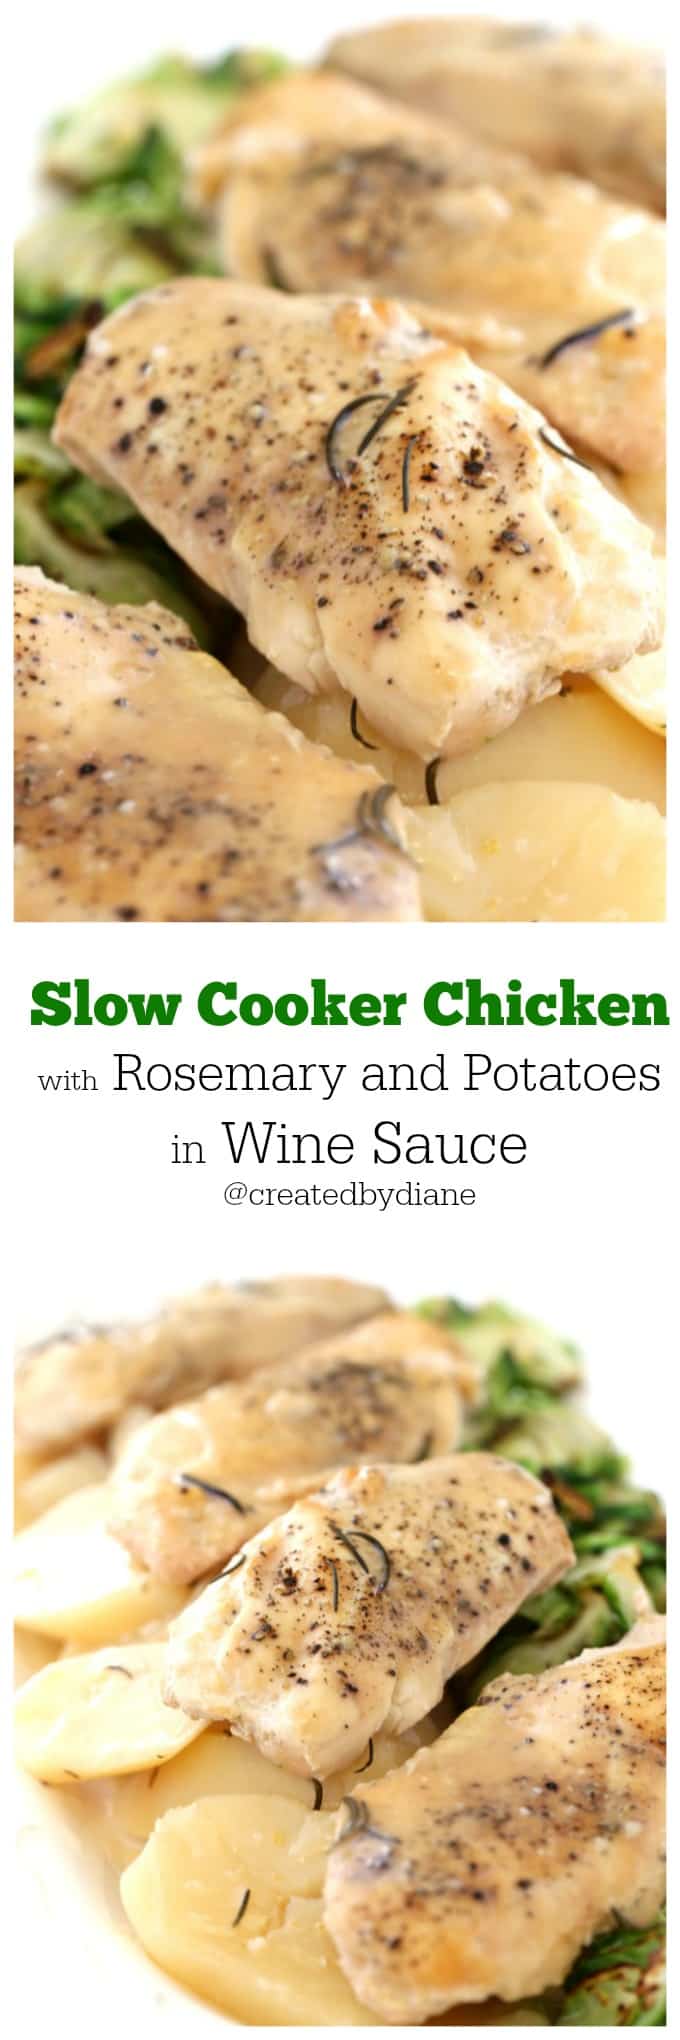 Slow Cooker chicken with Rosemary in wine sauce from @createdbydiane